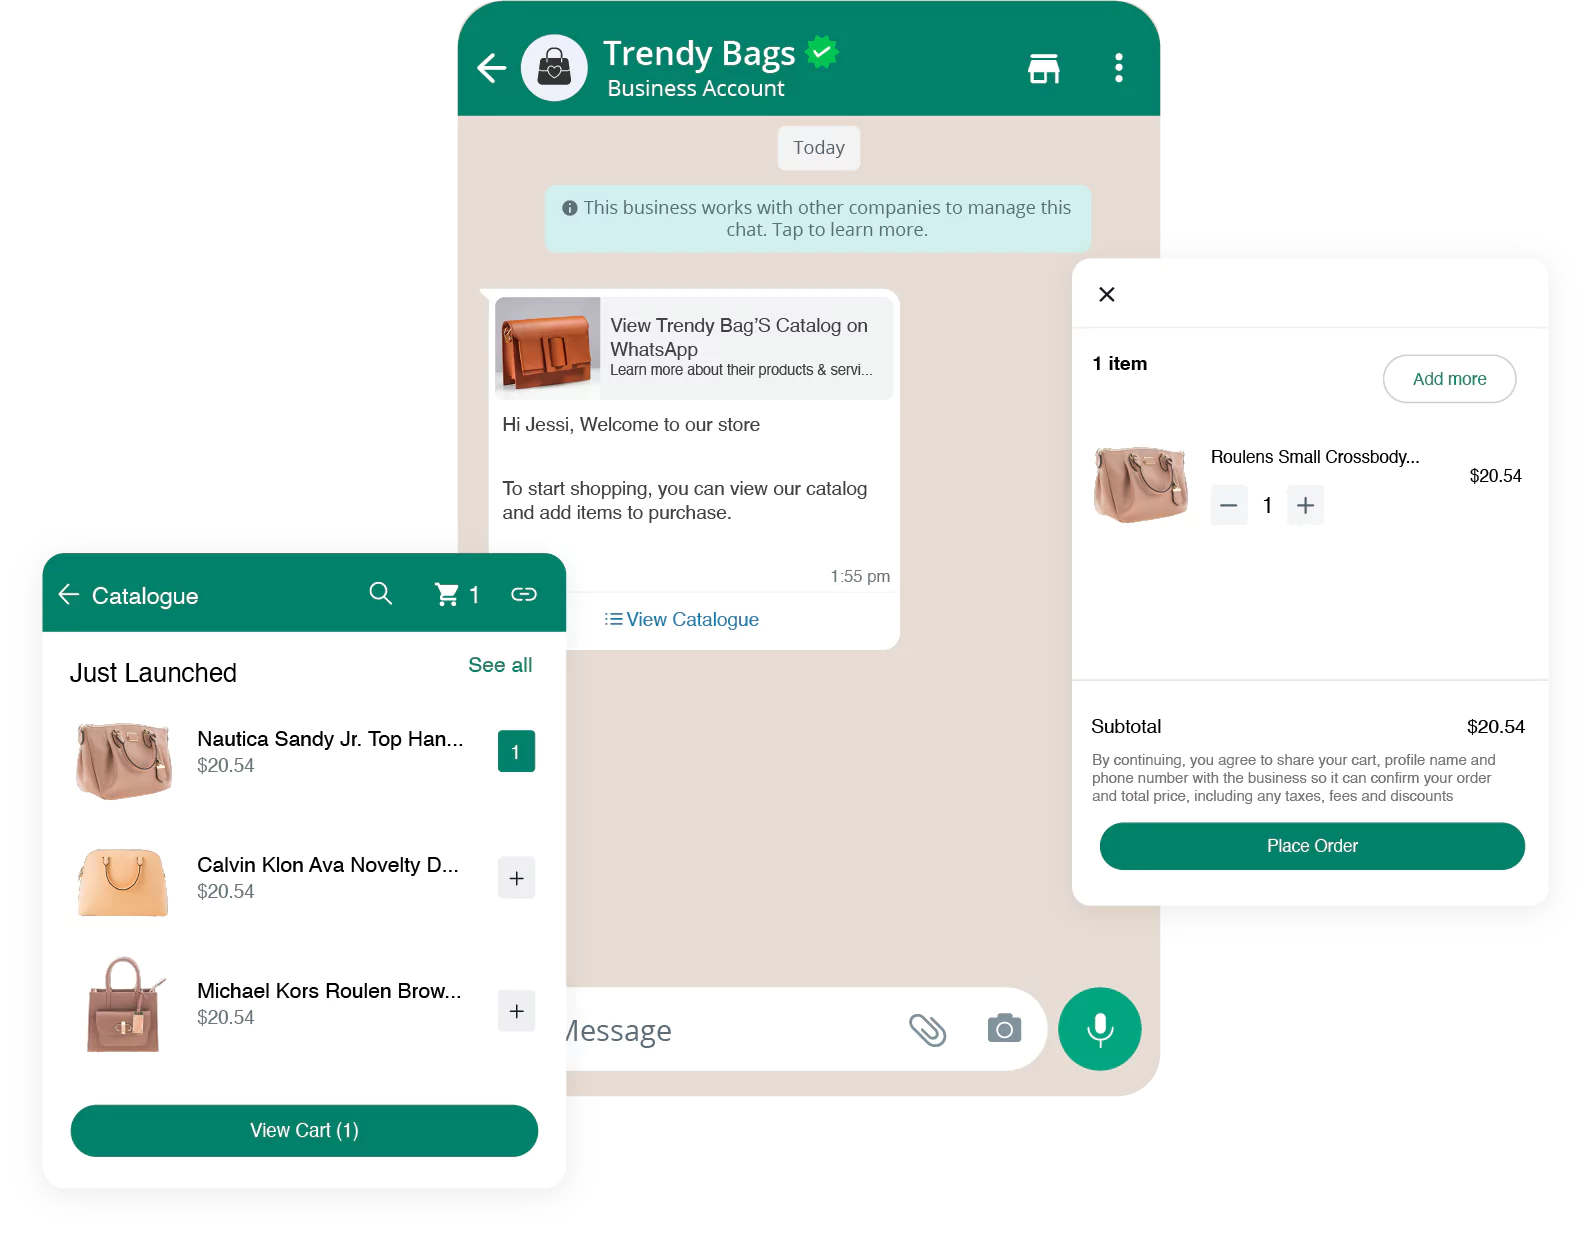 How does WhatsApp Marketing Automation work?